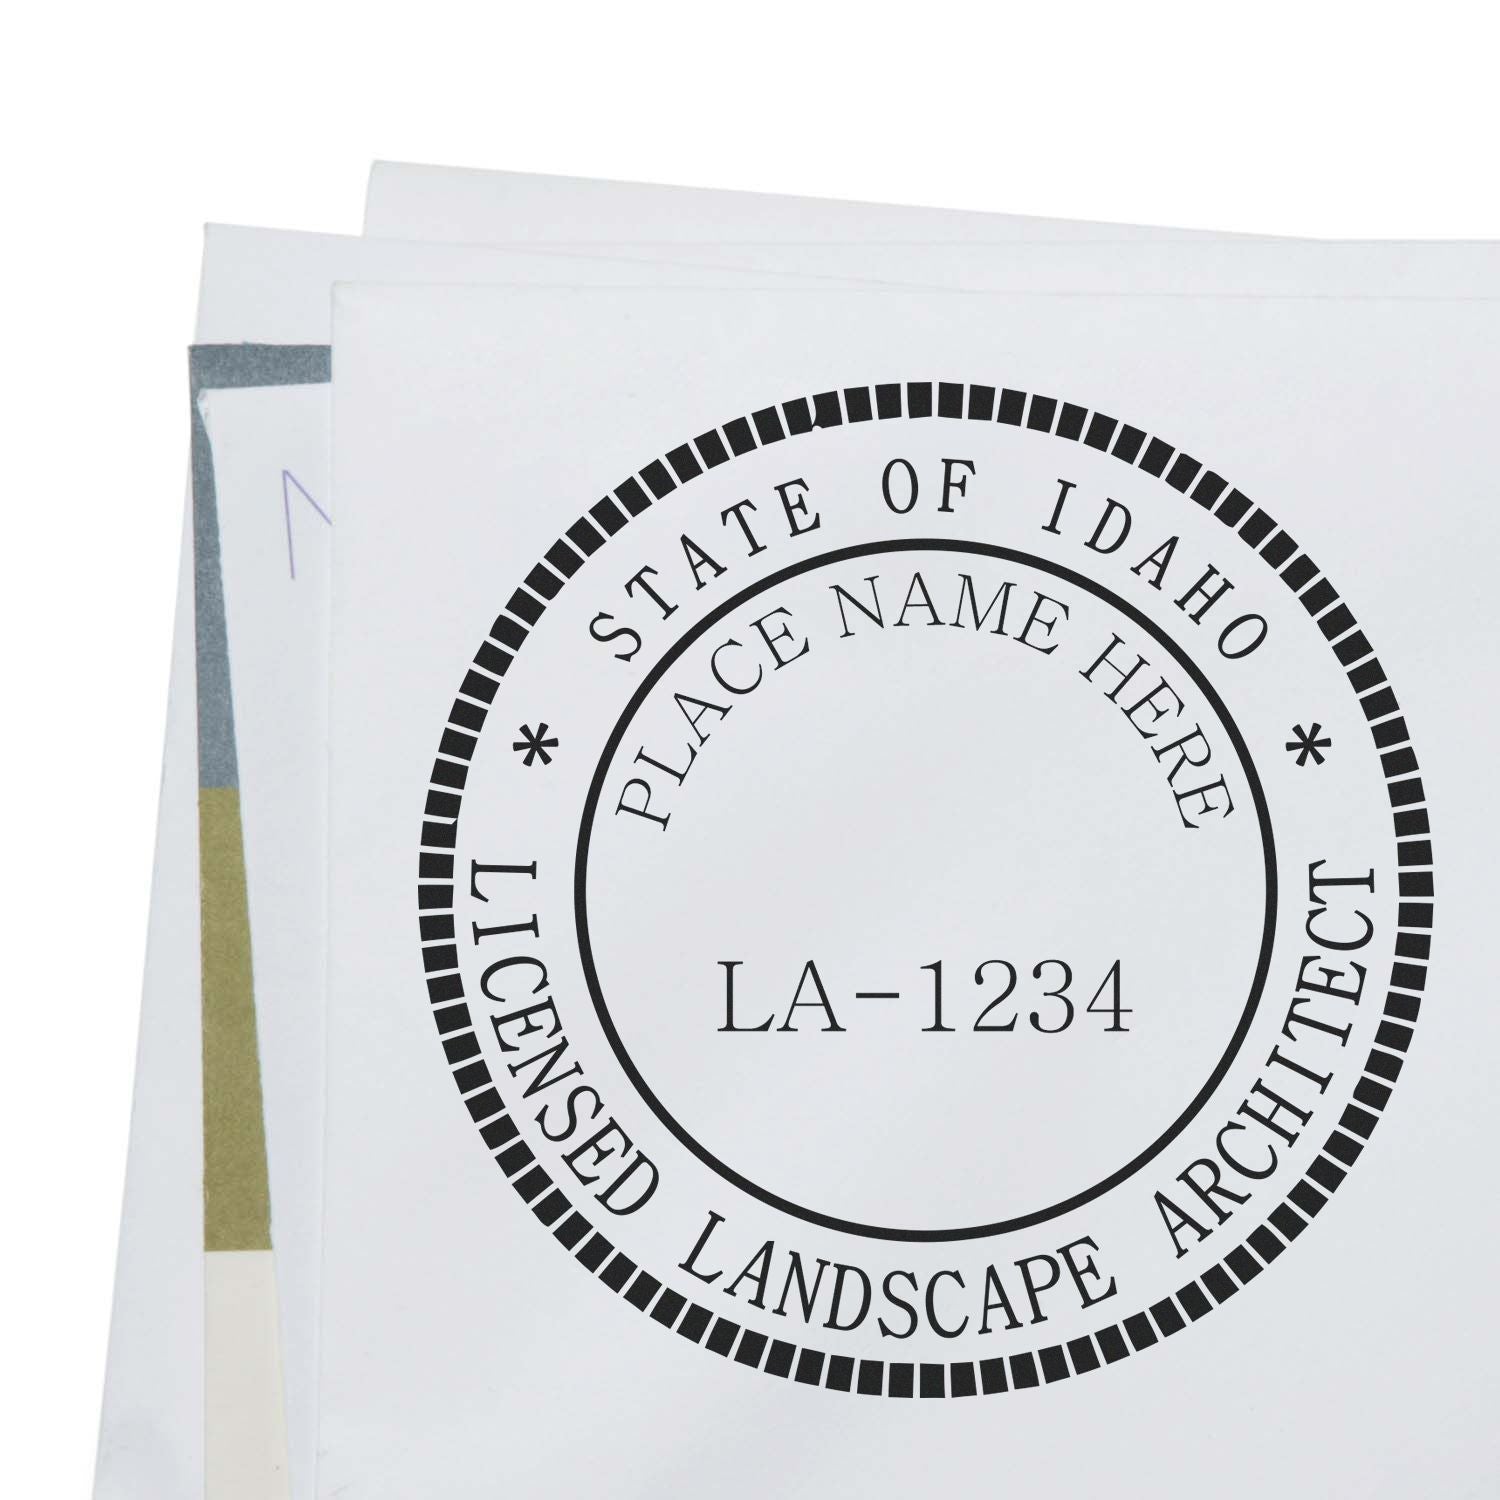 A photograph of the Self-Inking Idaho Landscape Architect Stamp stamp impression reveals a vivid, professional image of the on paper.